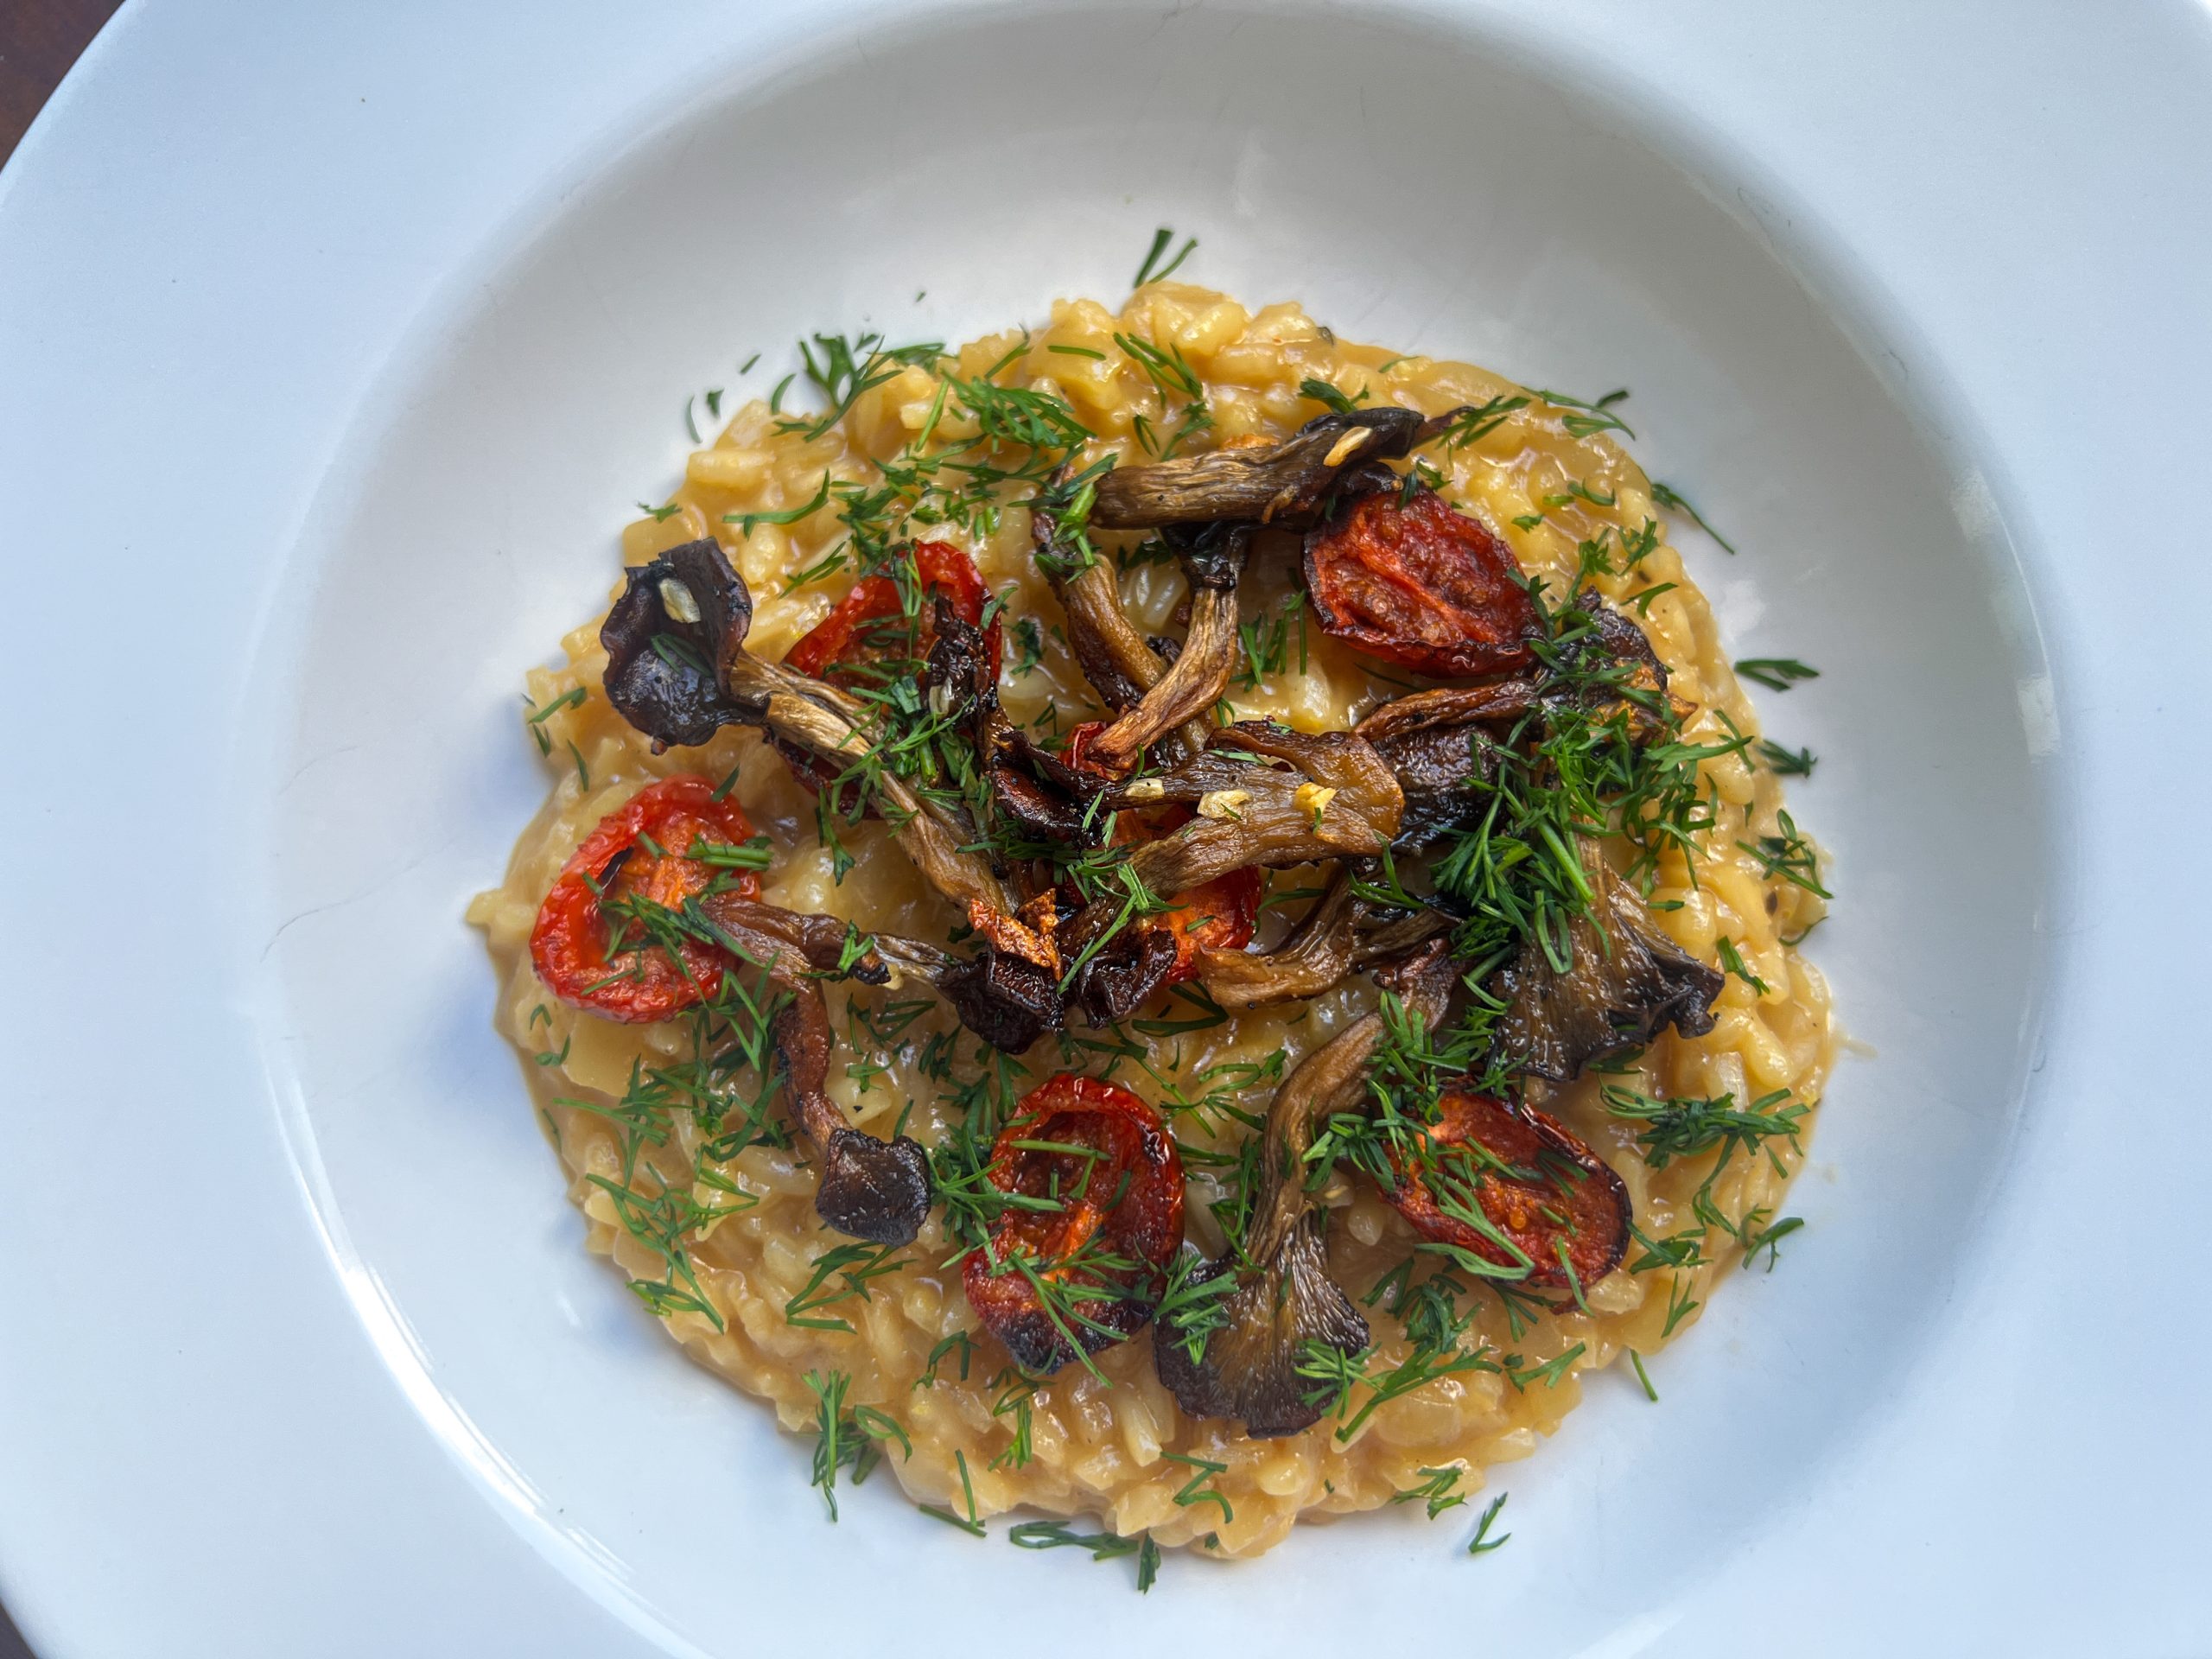 Oven Risotto with Roasted Mushrooms & Tomatoes